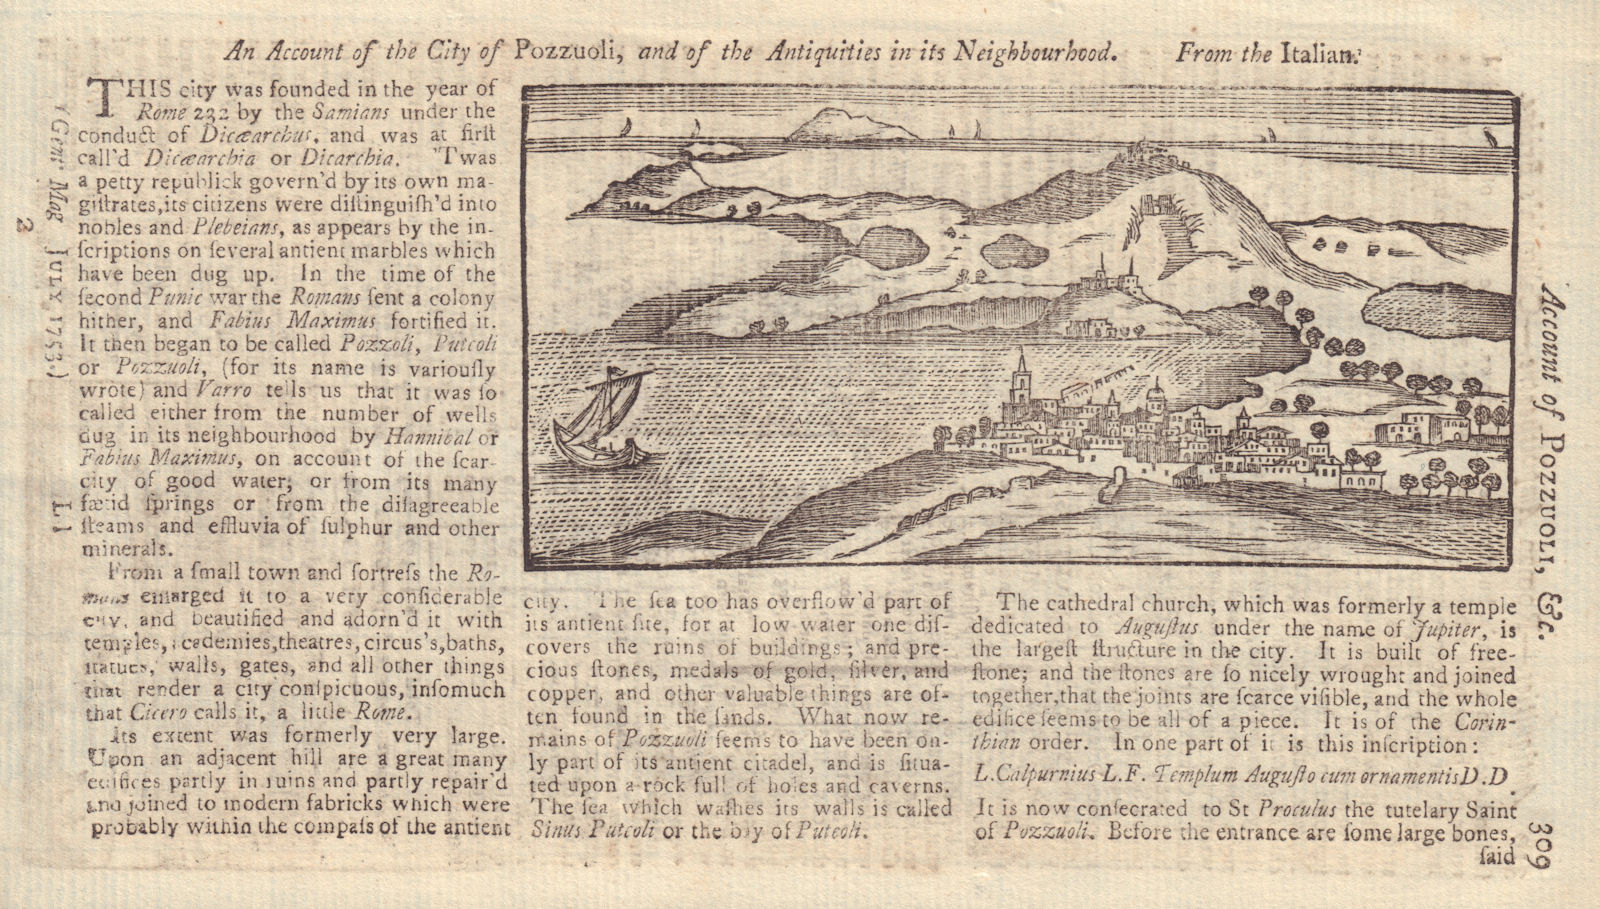 Pozzuoli and the antiquities in its neighbourhood. Naples, Italy 1753 print